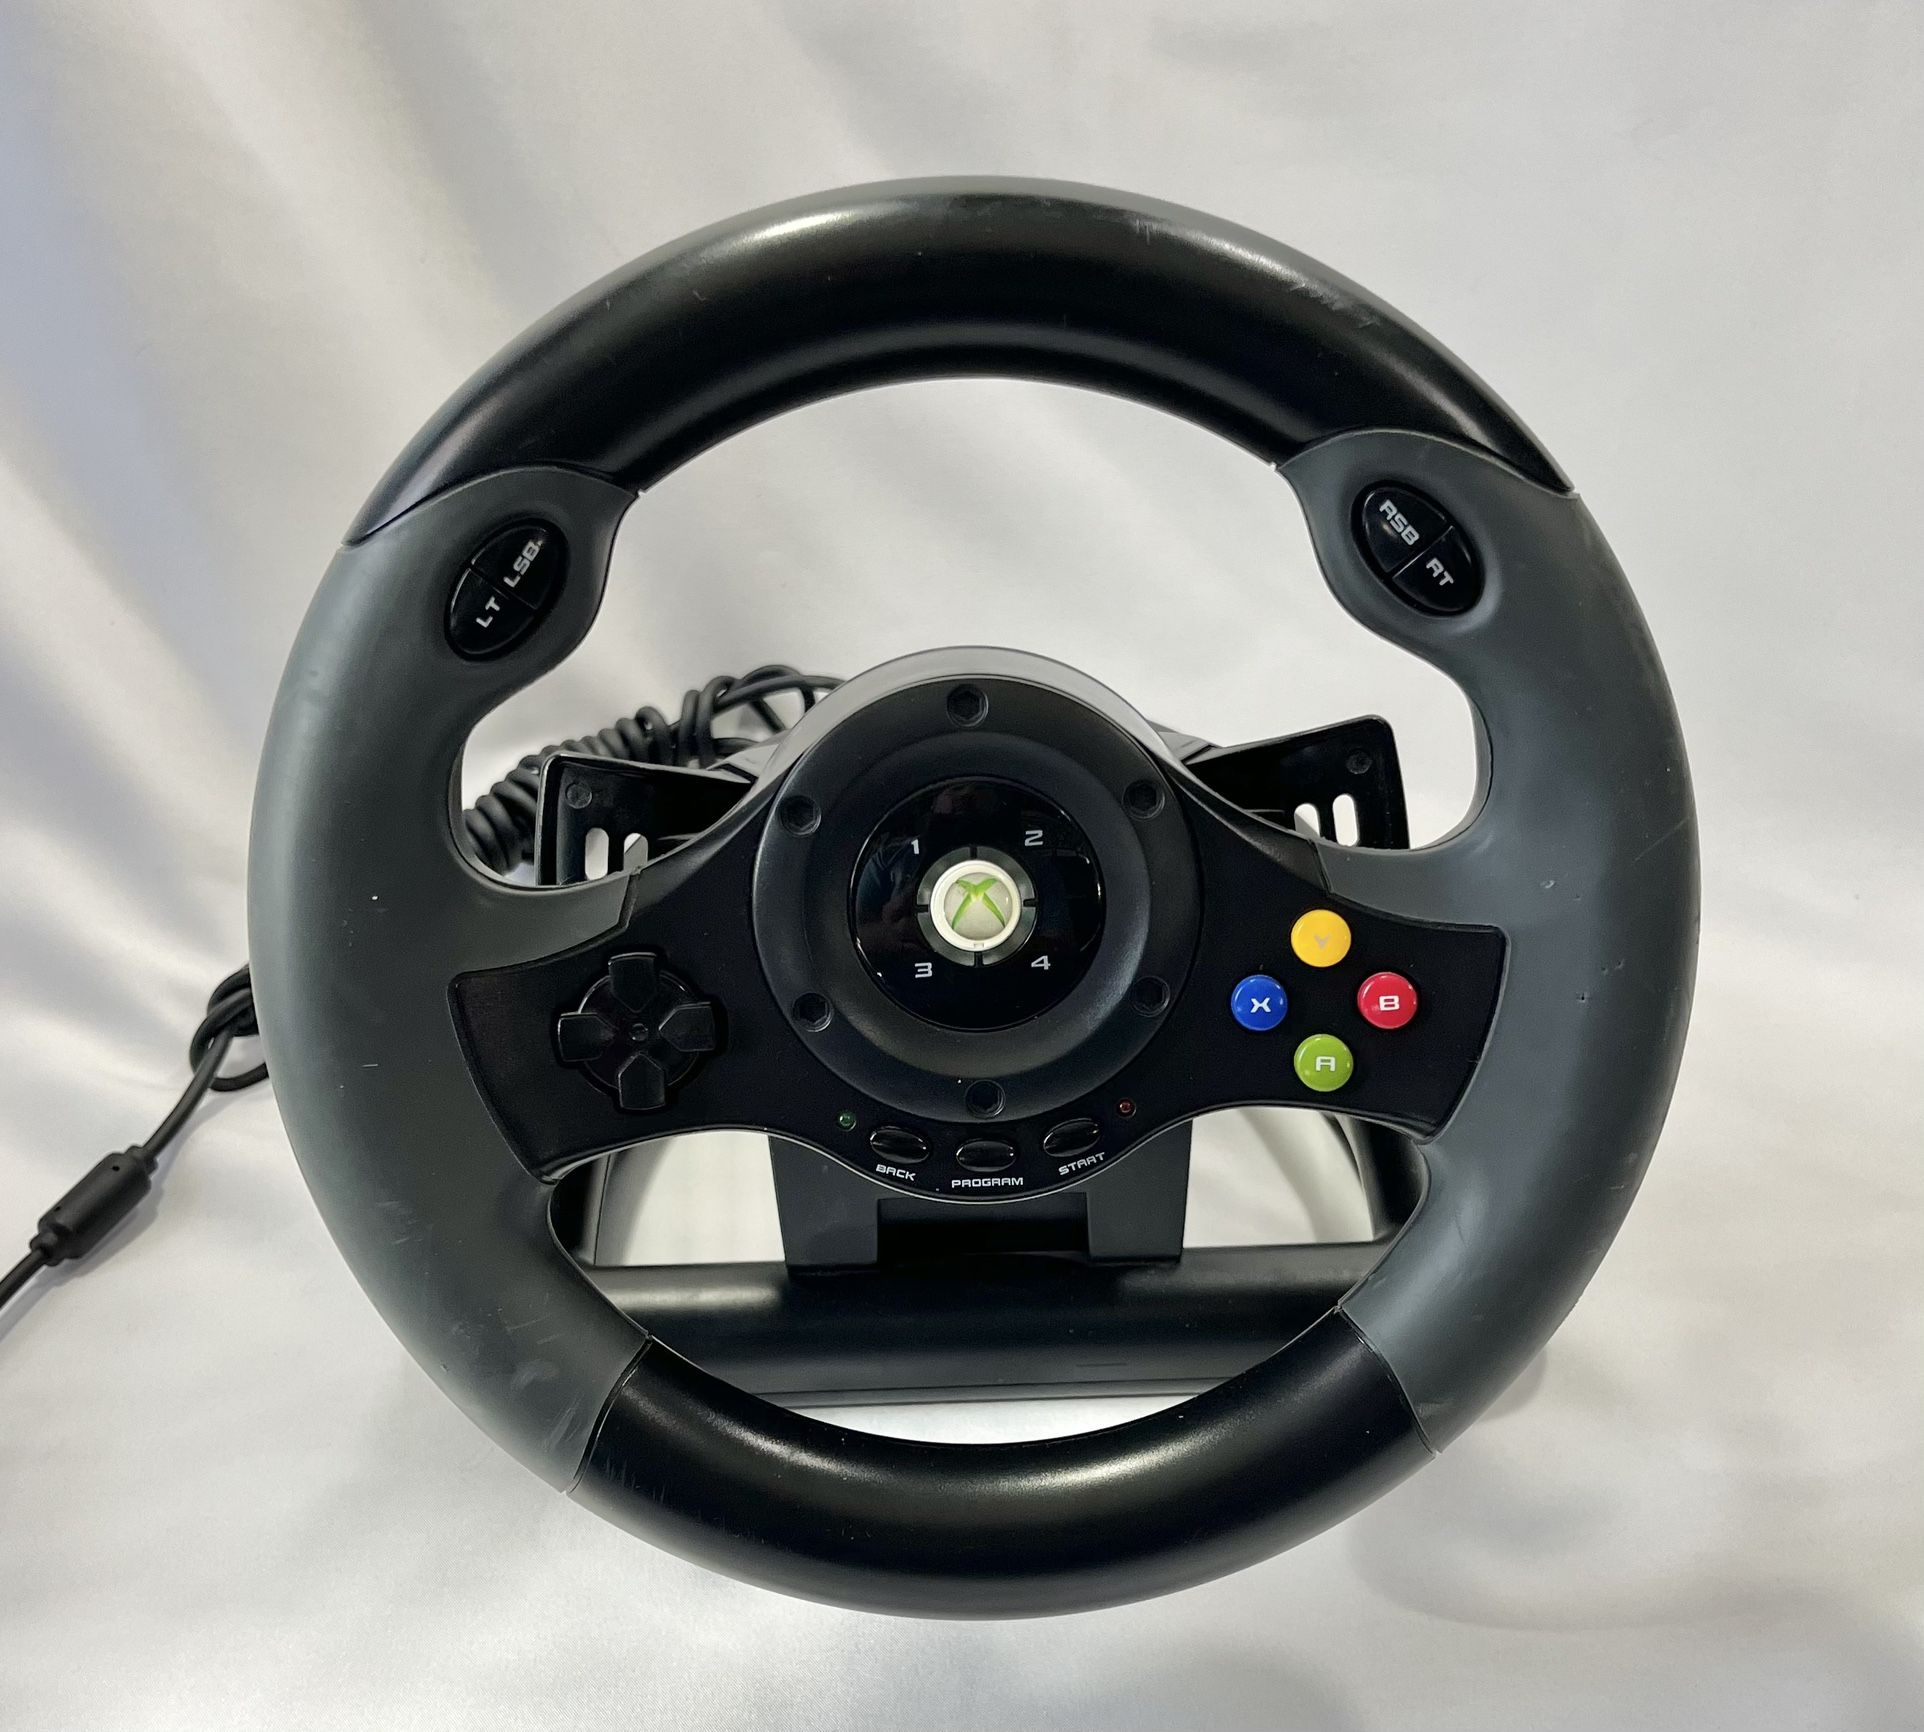 HORI Racing Wheel EX2 For Xbox 360 Wired Connection Tested